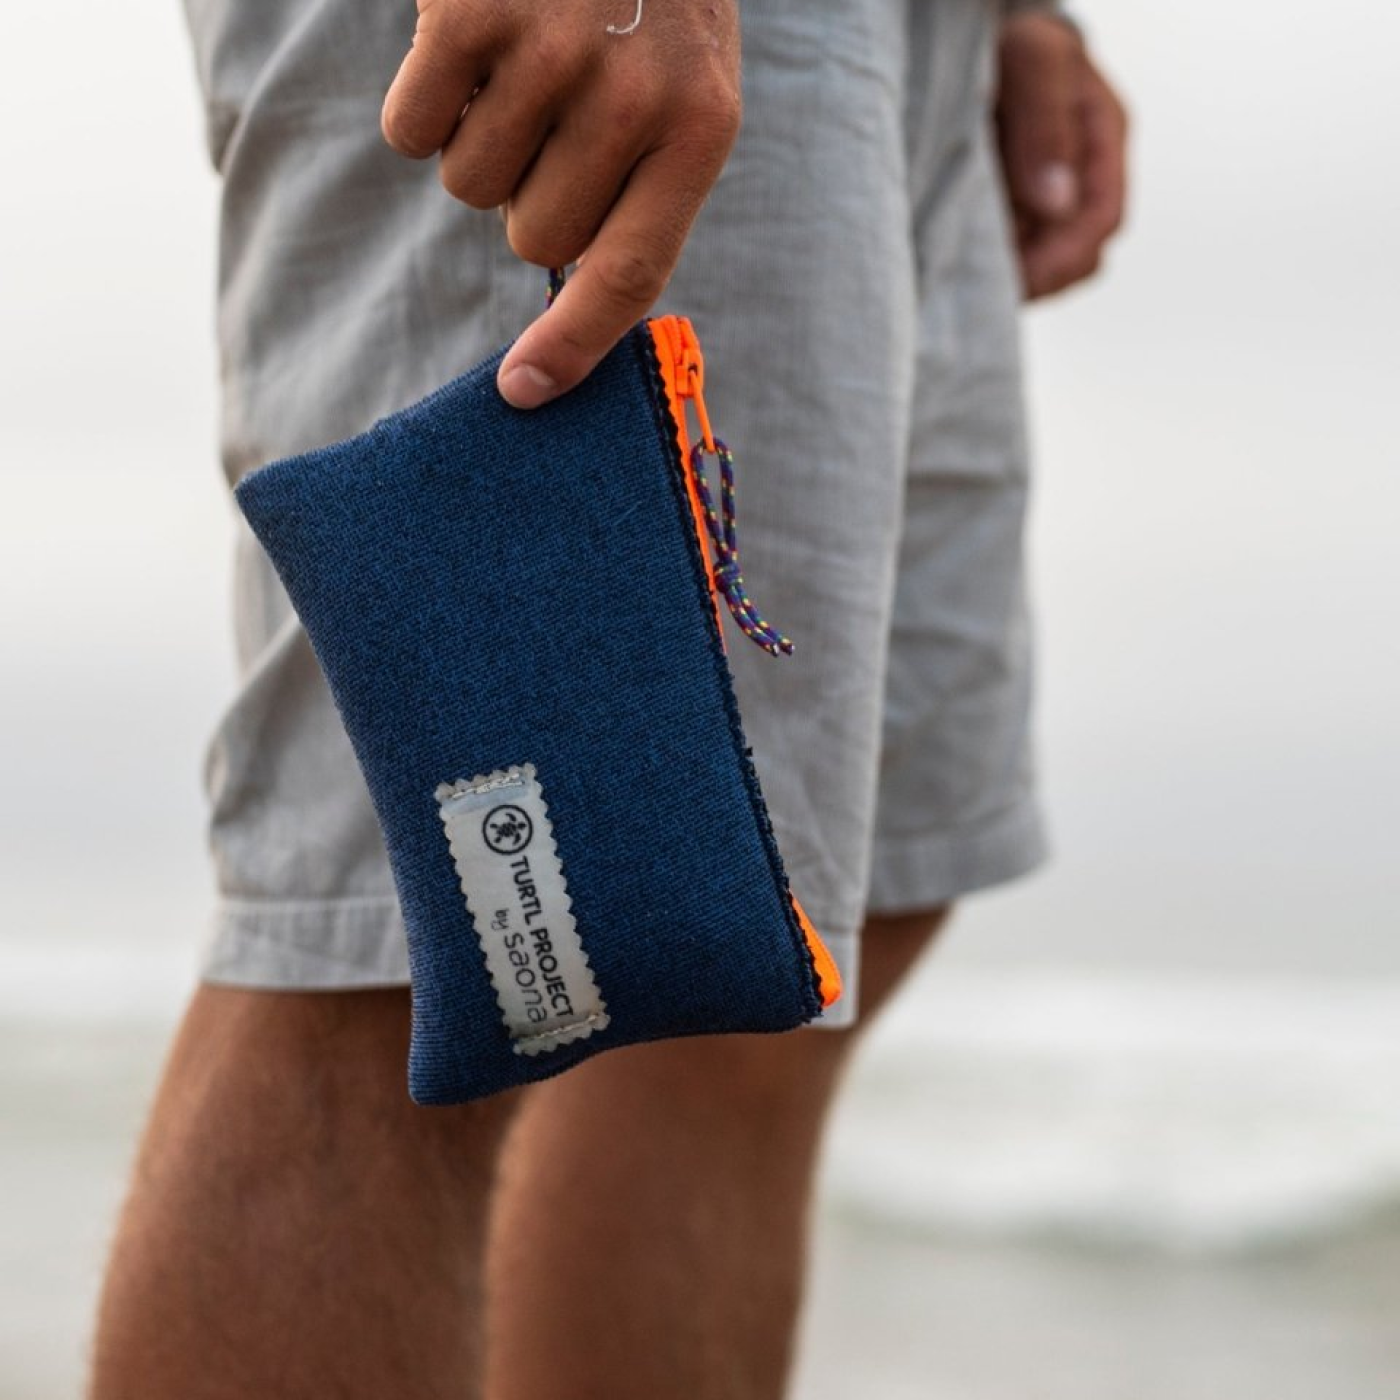 Man holding Turtl Project's recycled re-wallet